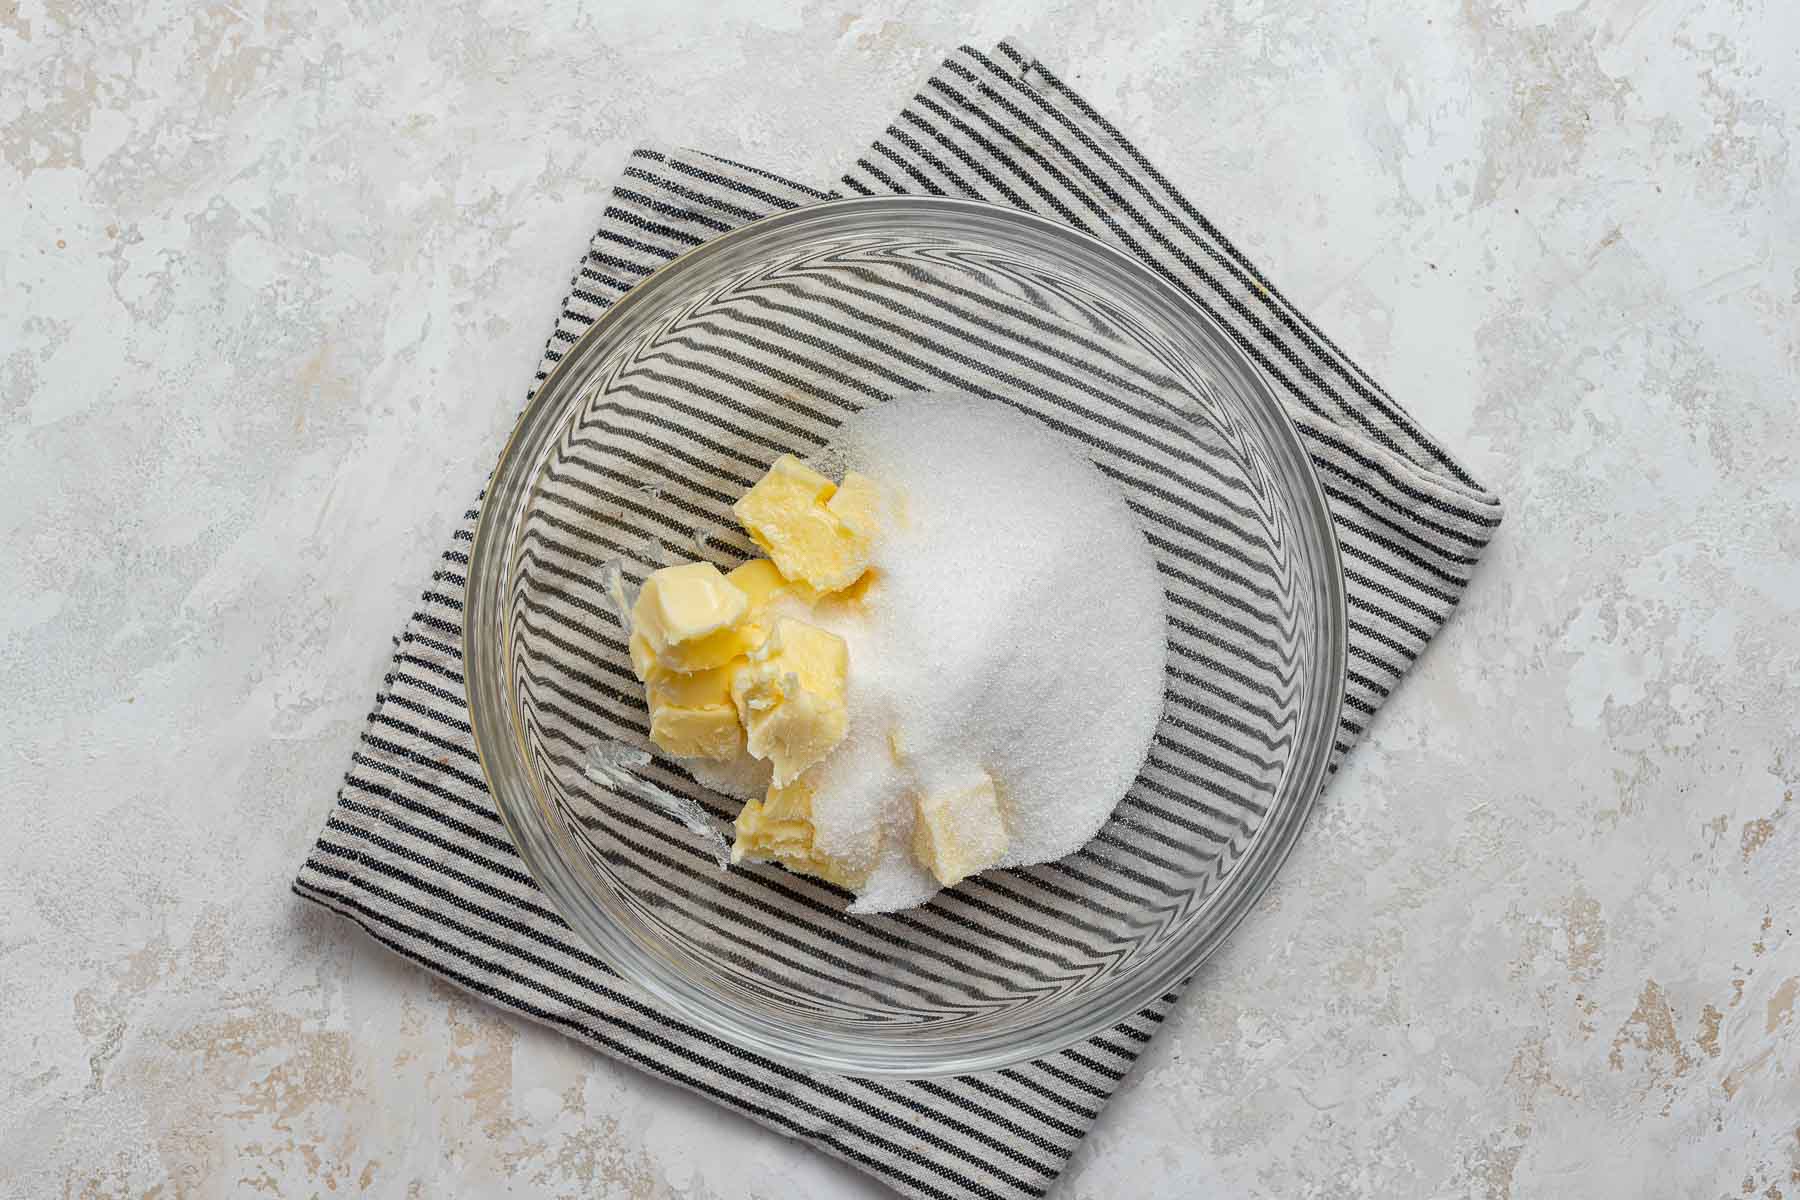 Diced butter and granulated sugar in a clear glass bowl.